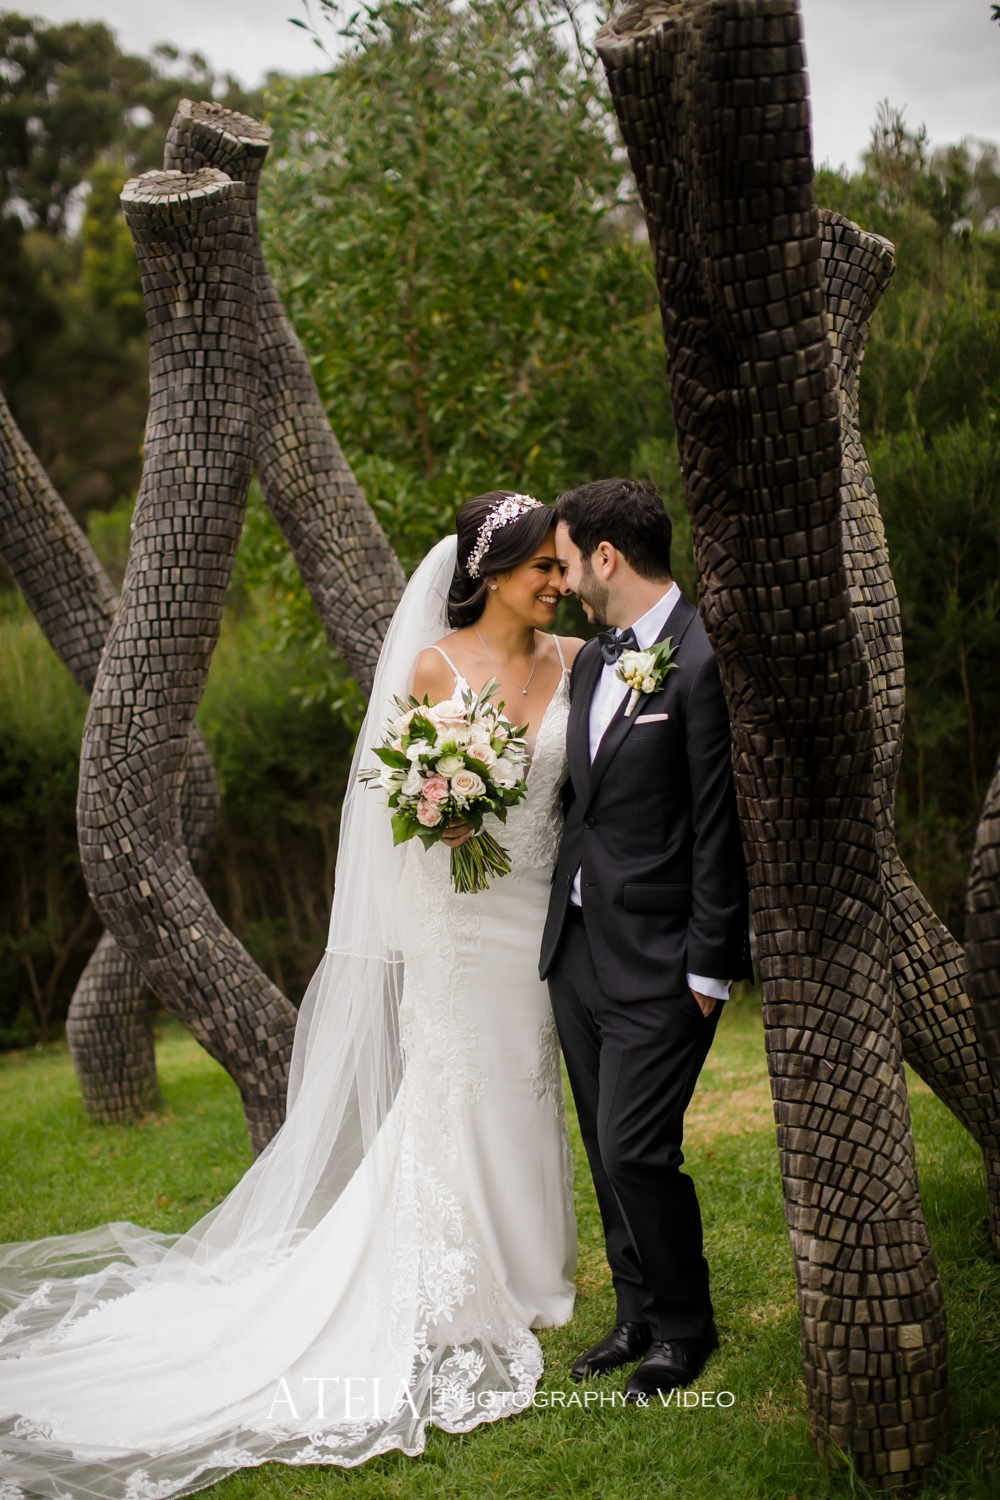 , Montalto Wedding Photography Red Hill by ATEIA Photography &#038; Video